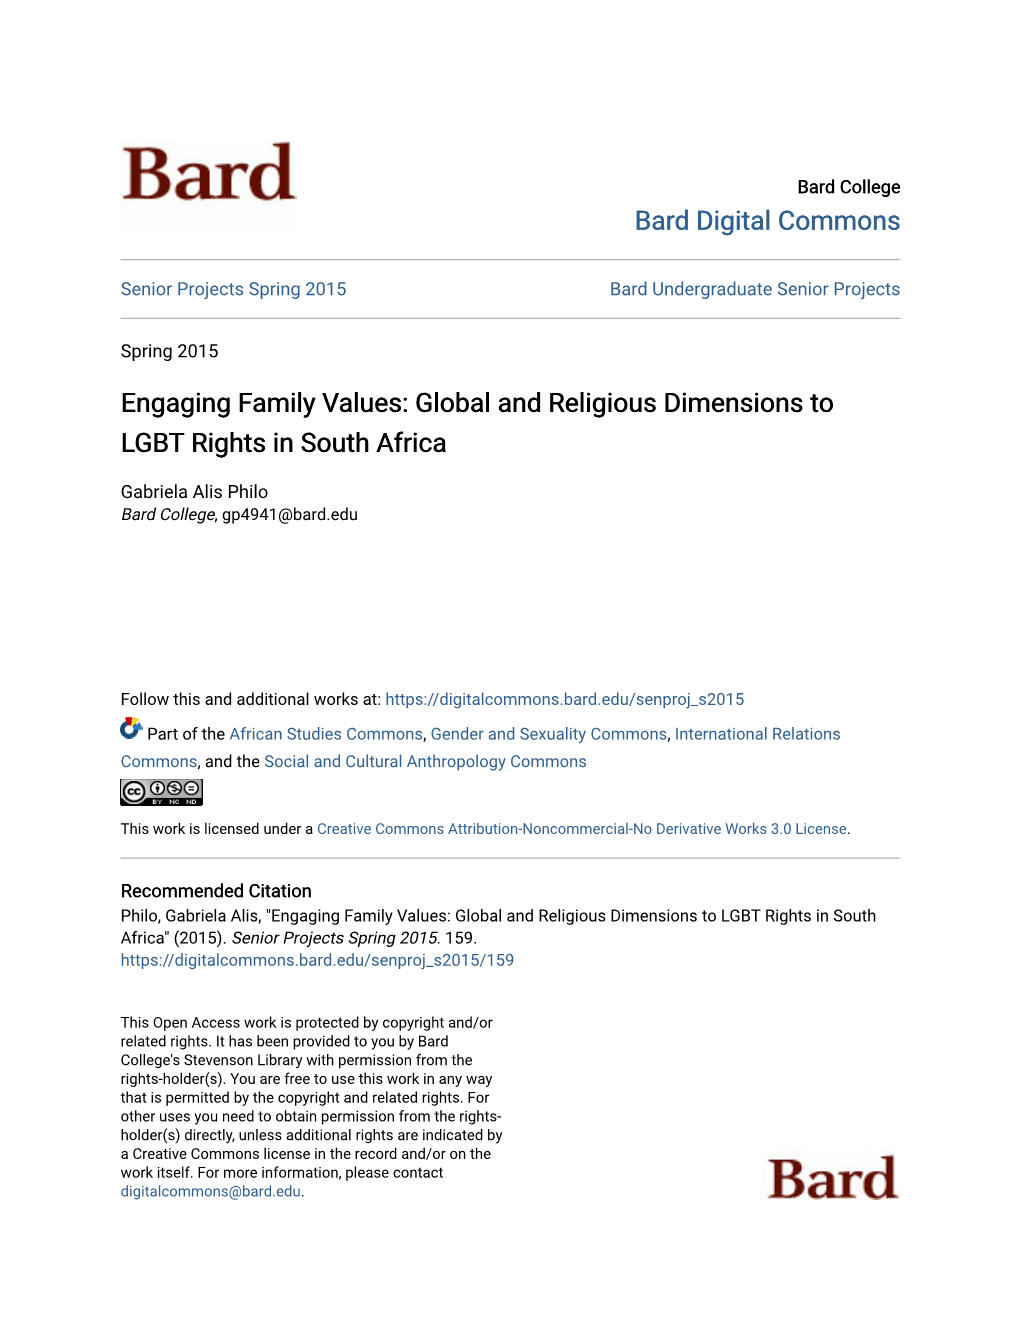 Engaging Family Values: Global and Religious Dimensions to LGBT Rights in South Africa